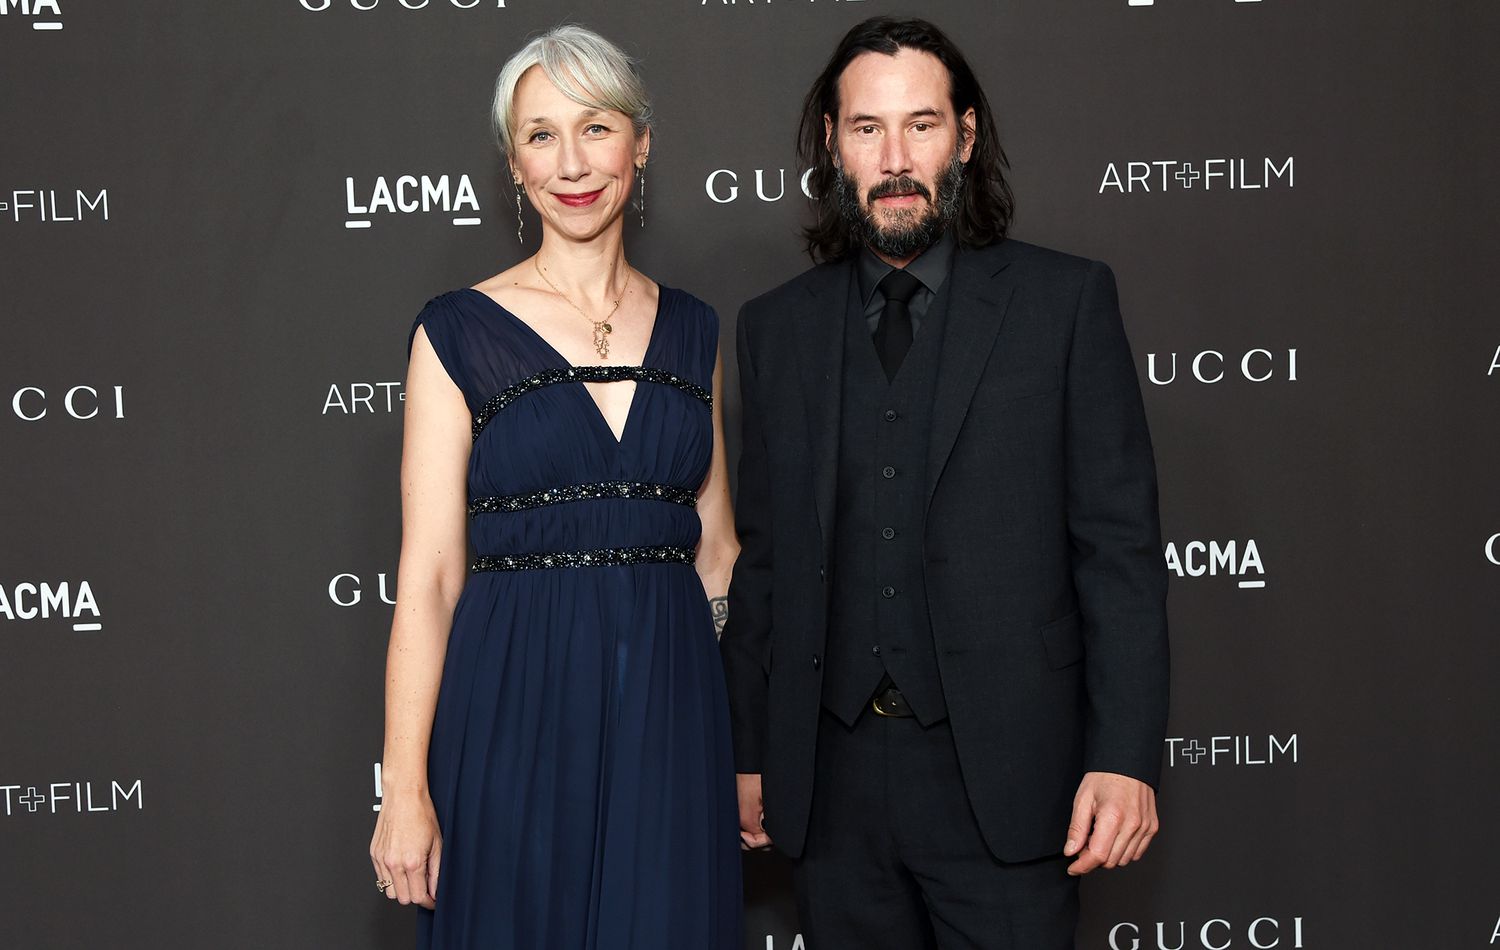 Is Keanu Reeves in a relationship?